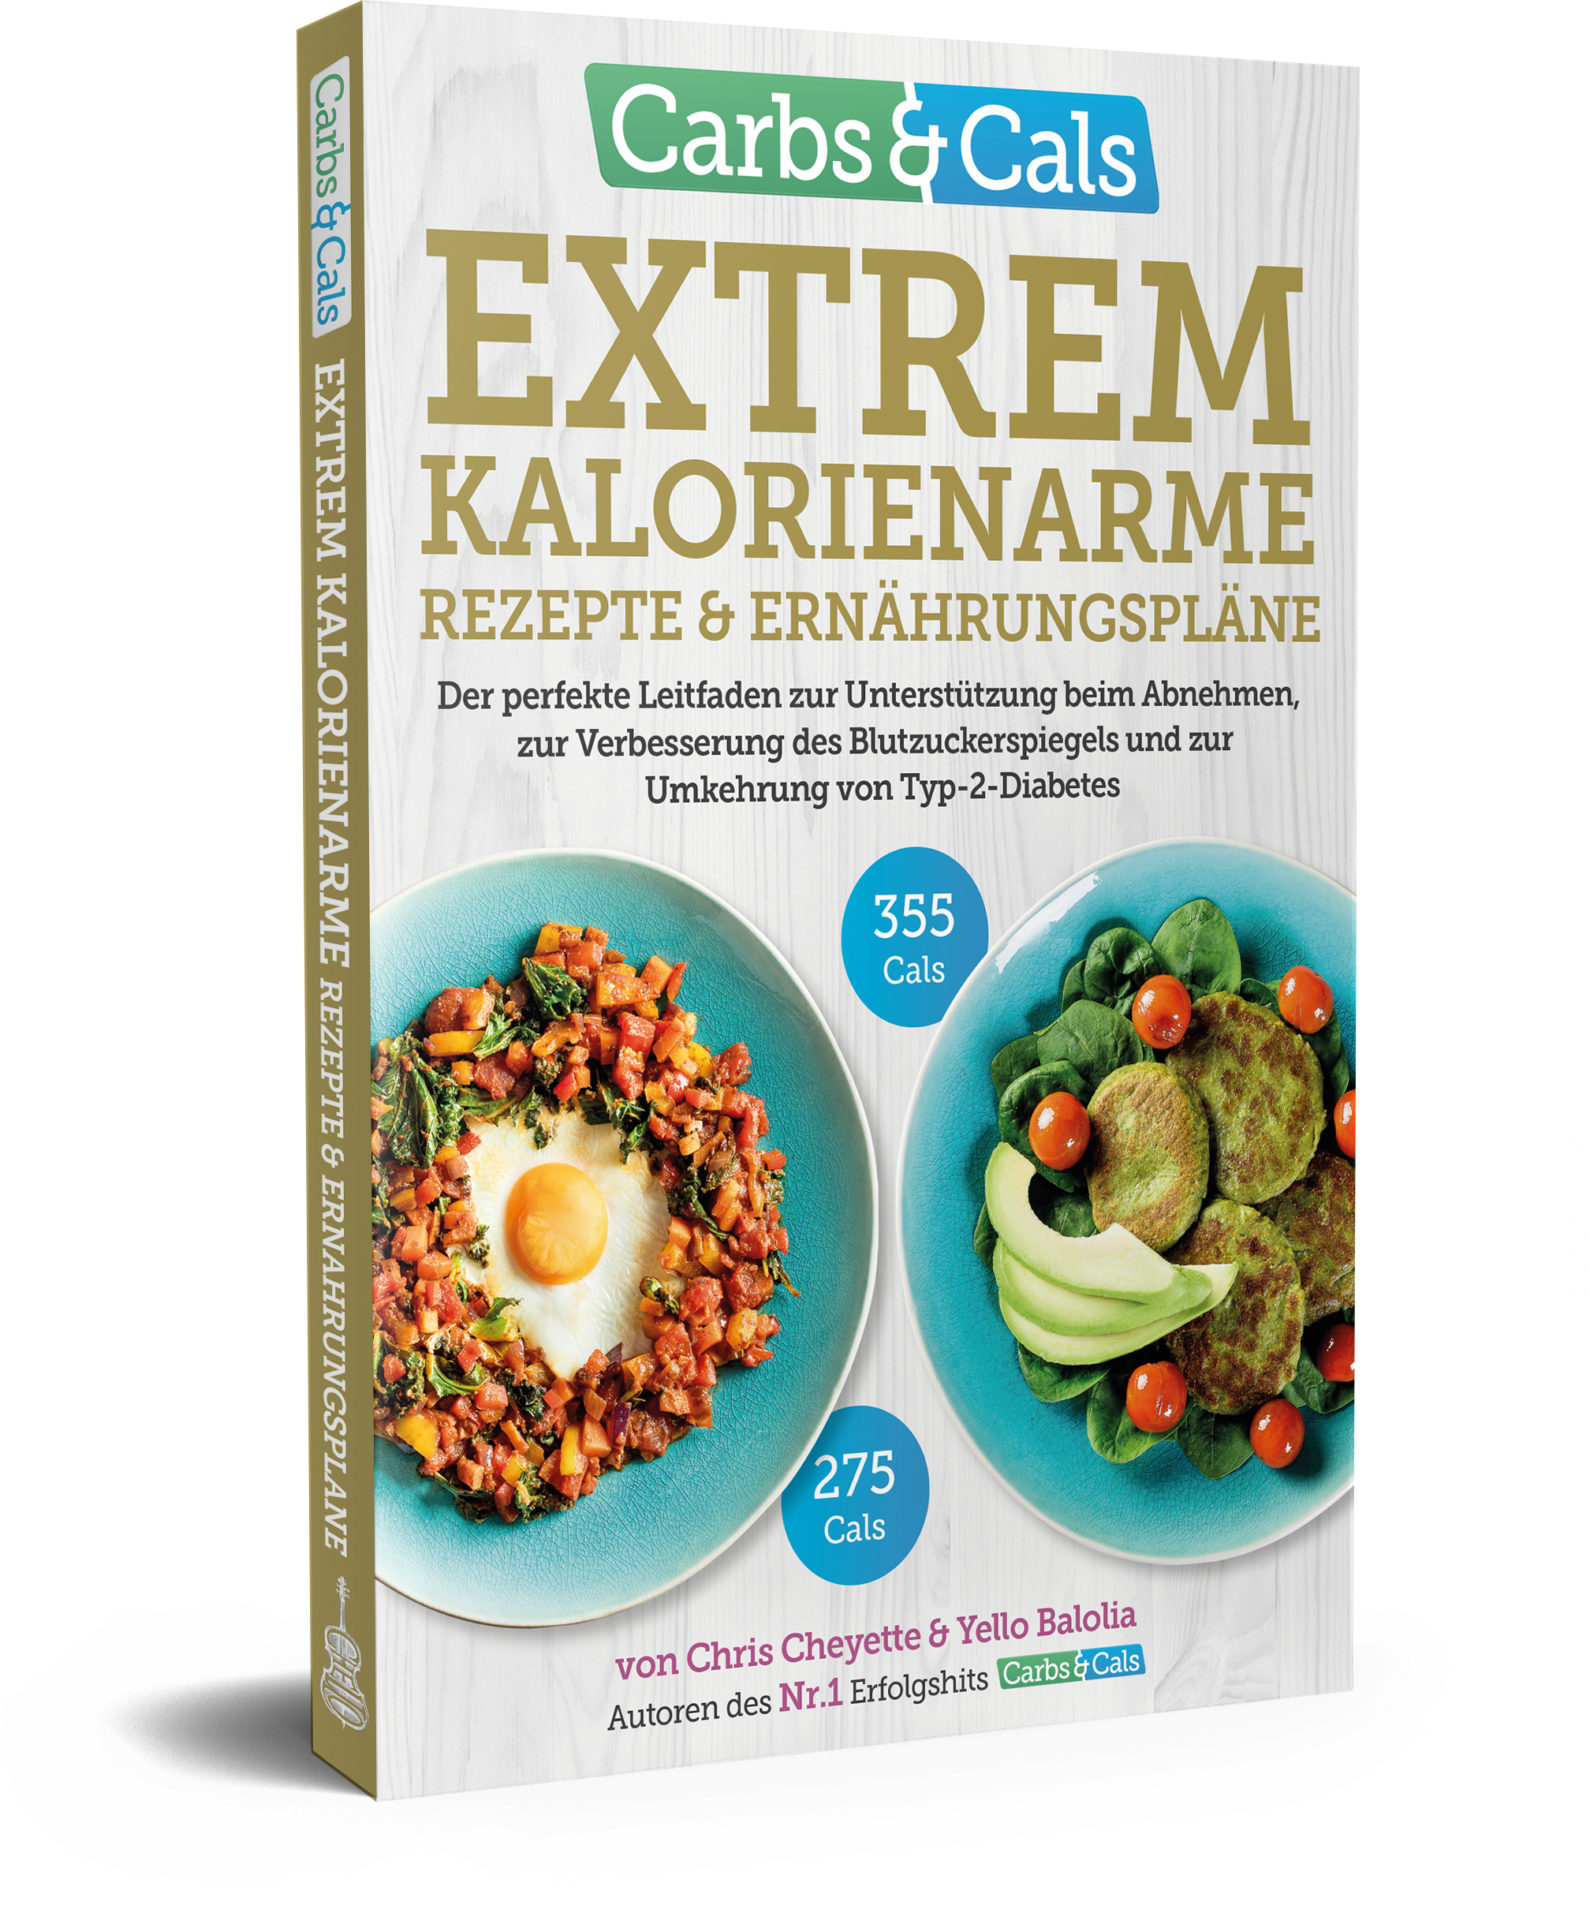 German Edition of Very Low Calorie Book Cover